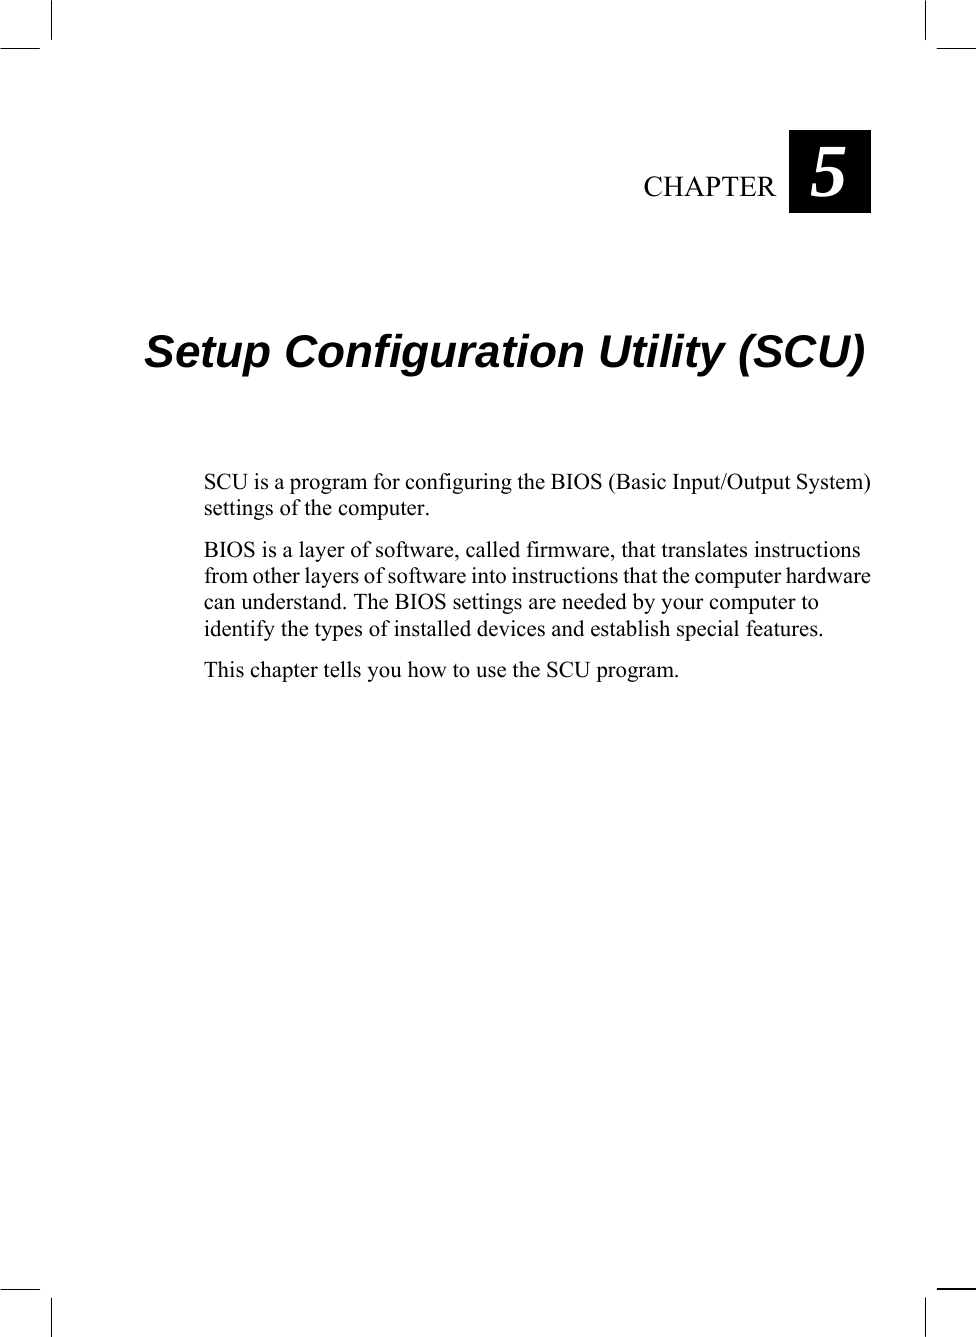   CHAPTER  5 Setup Configuration Utility (SCU) SCU is a program for configuring the BIOS (Basic Input/Output System) settings of the computer. BIOS is a layer of software, called firmware, that translates instructions from other layers of software into instructions that the computer hardware can understand. The BIOS settings are needed by your computer to identify the types of installed devices and establish special features. This chapter tells you how to use the SCU program. 